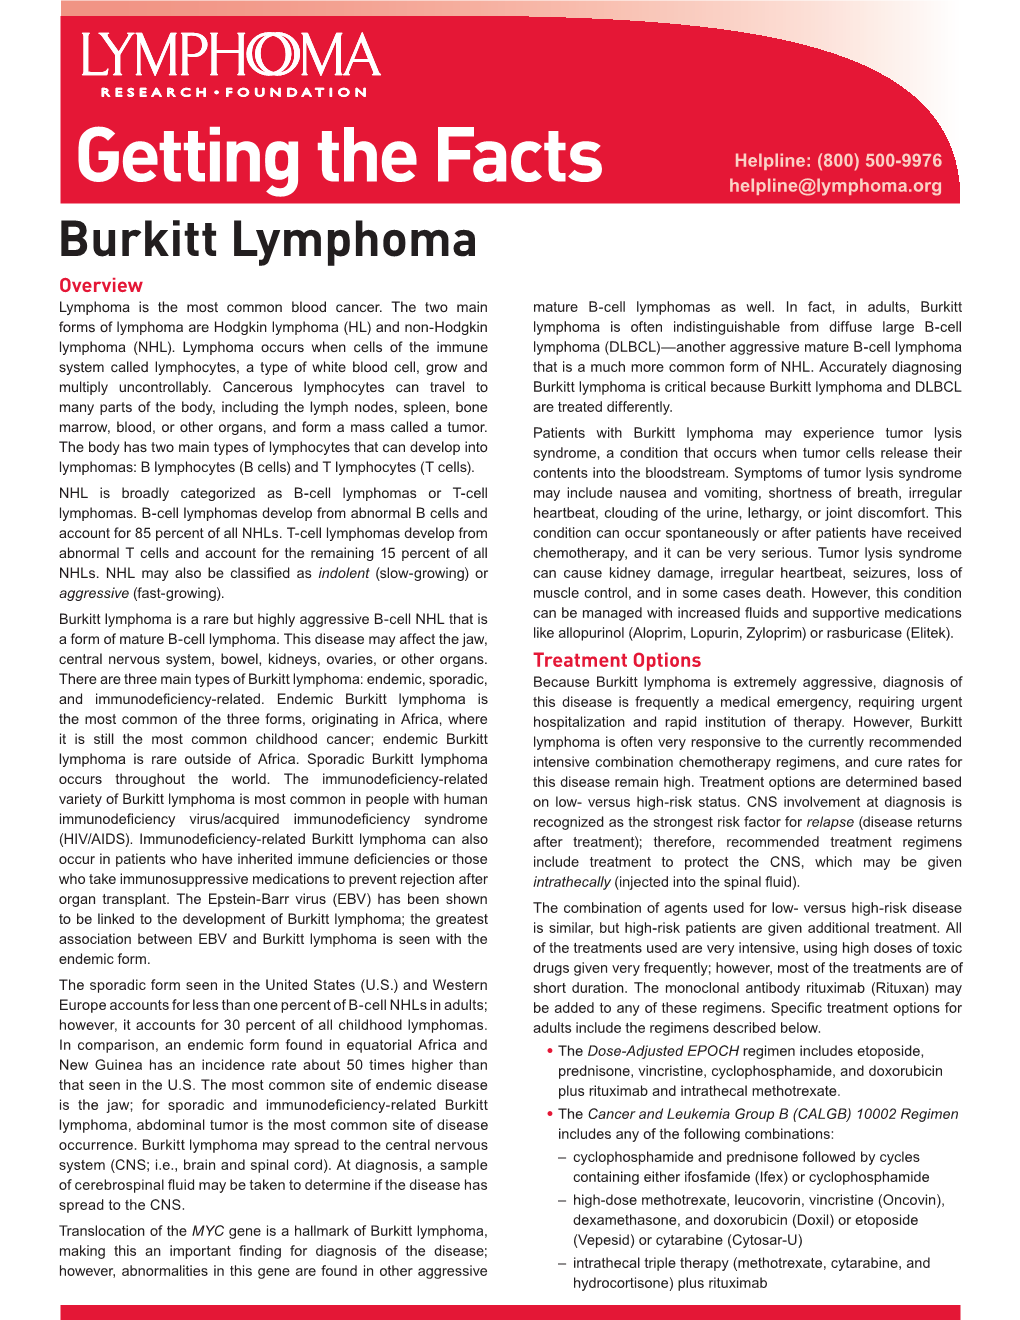 Burkitt Lymphoma Overview Lymphoma Is the Most Common Blood Cancer